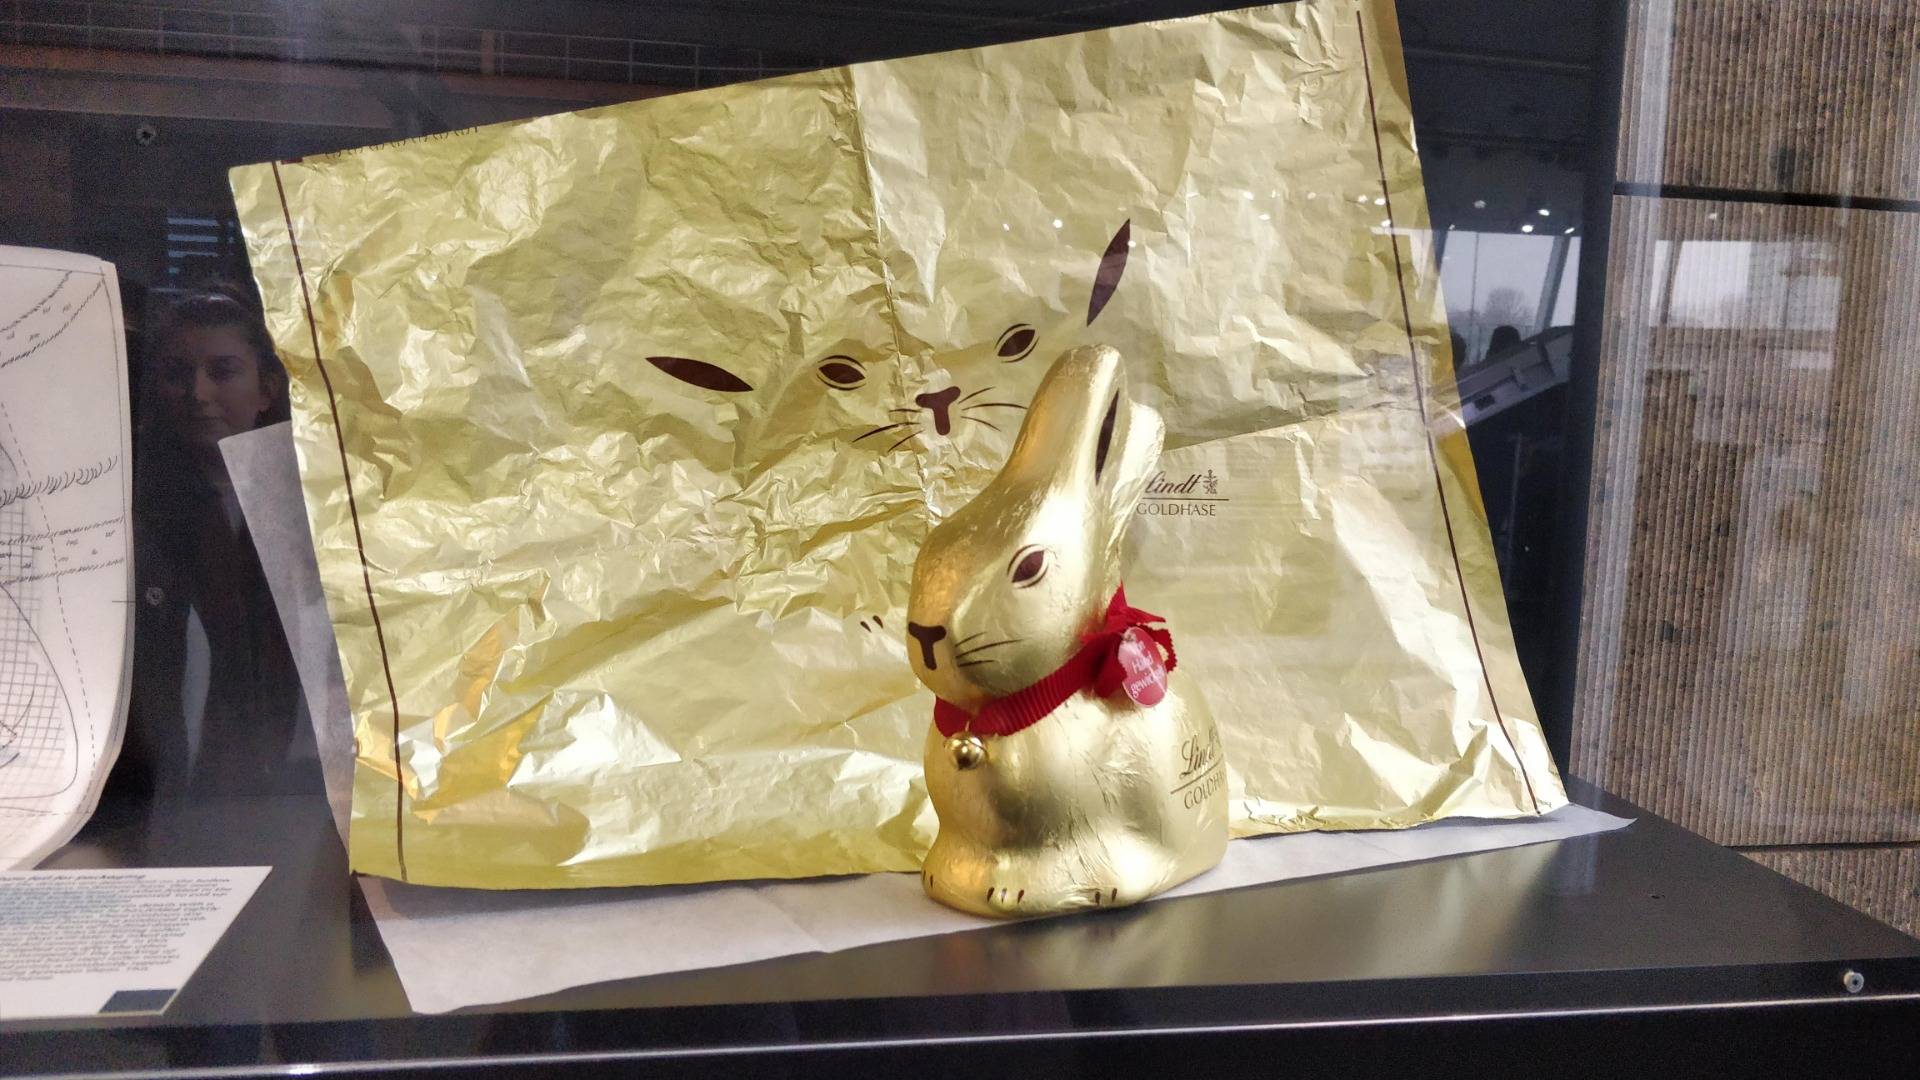 The iconic Lindt rabbit, with the slightly disturbing unfolded wrapping behind it!